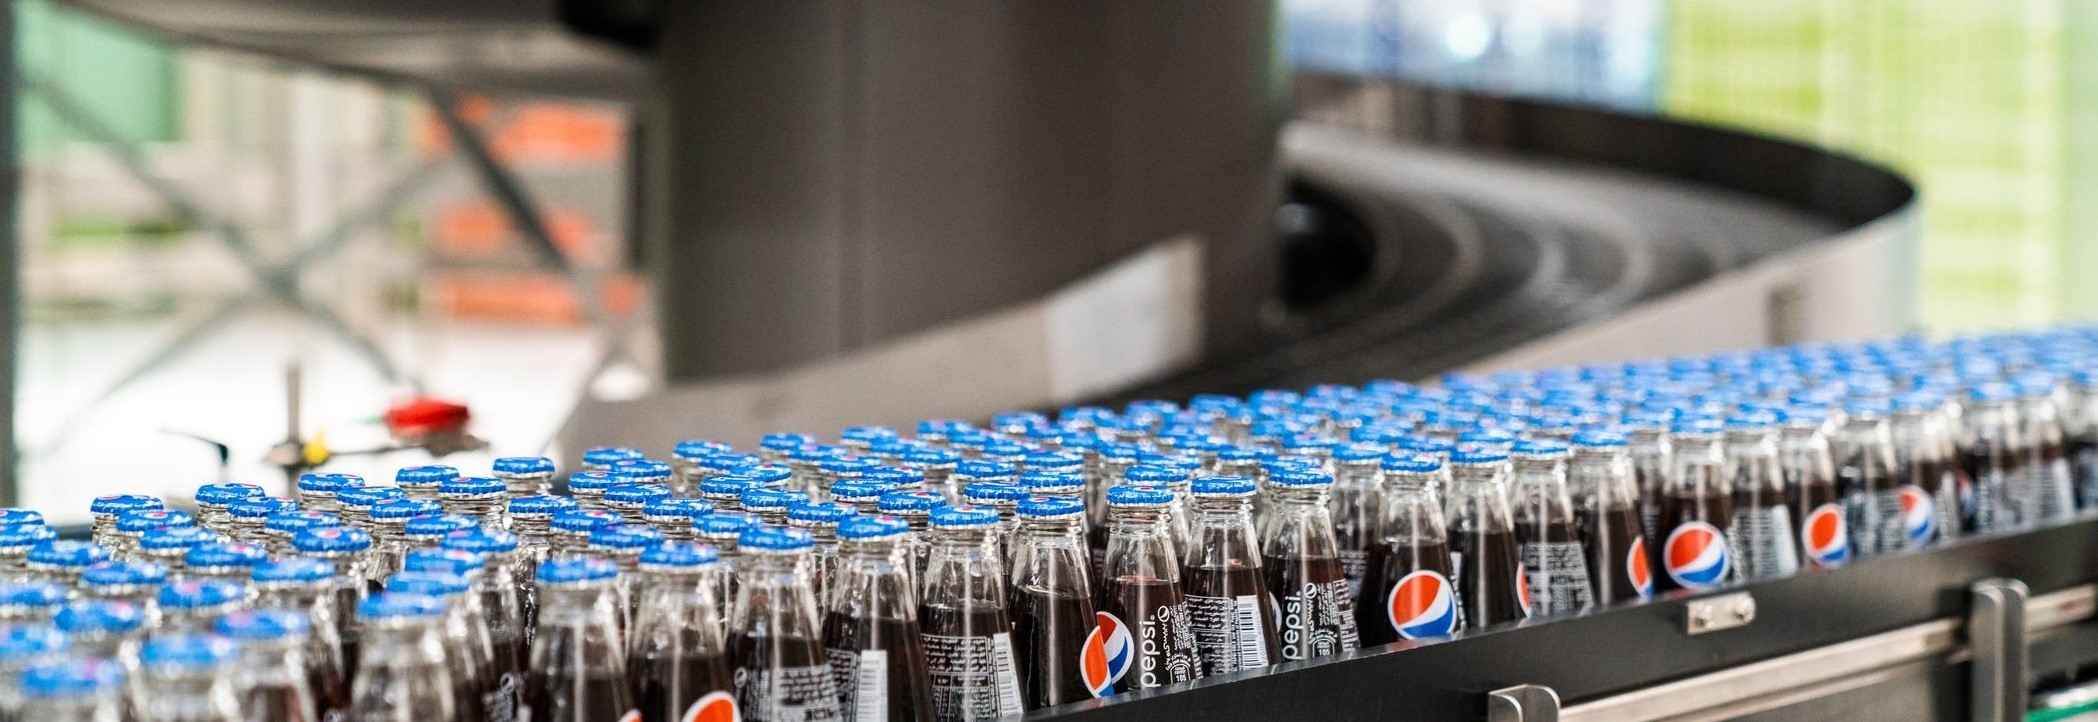 Image for One Of World’s Largest PEPSI Bottling Plant Goes Live With Infor WMS In Saudi Arabia